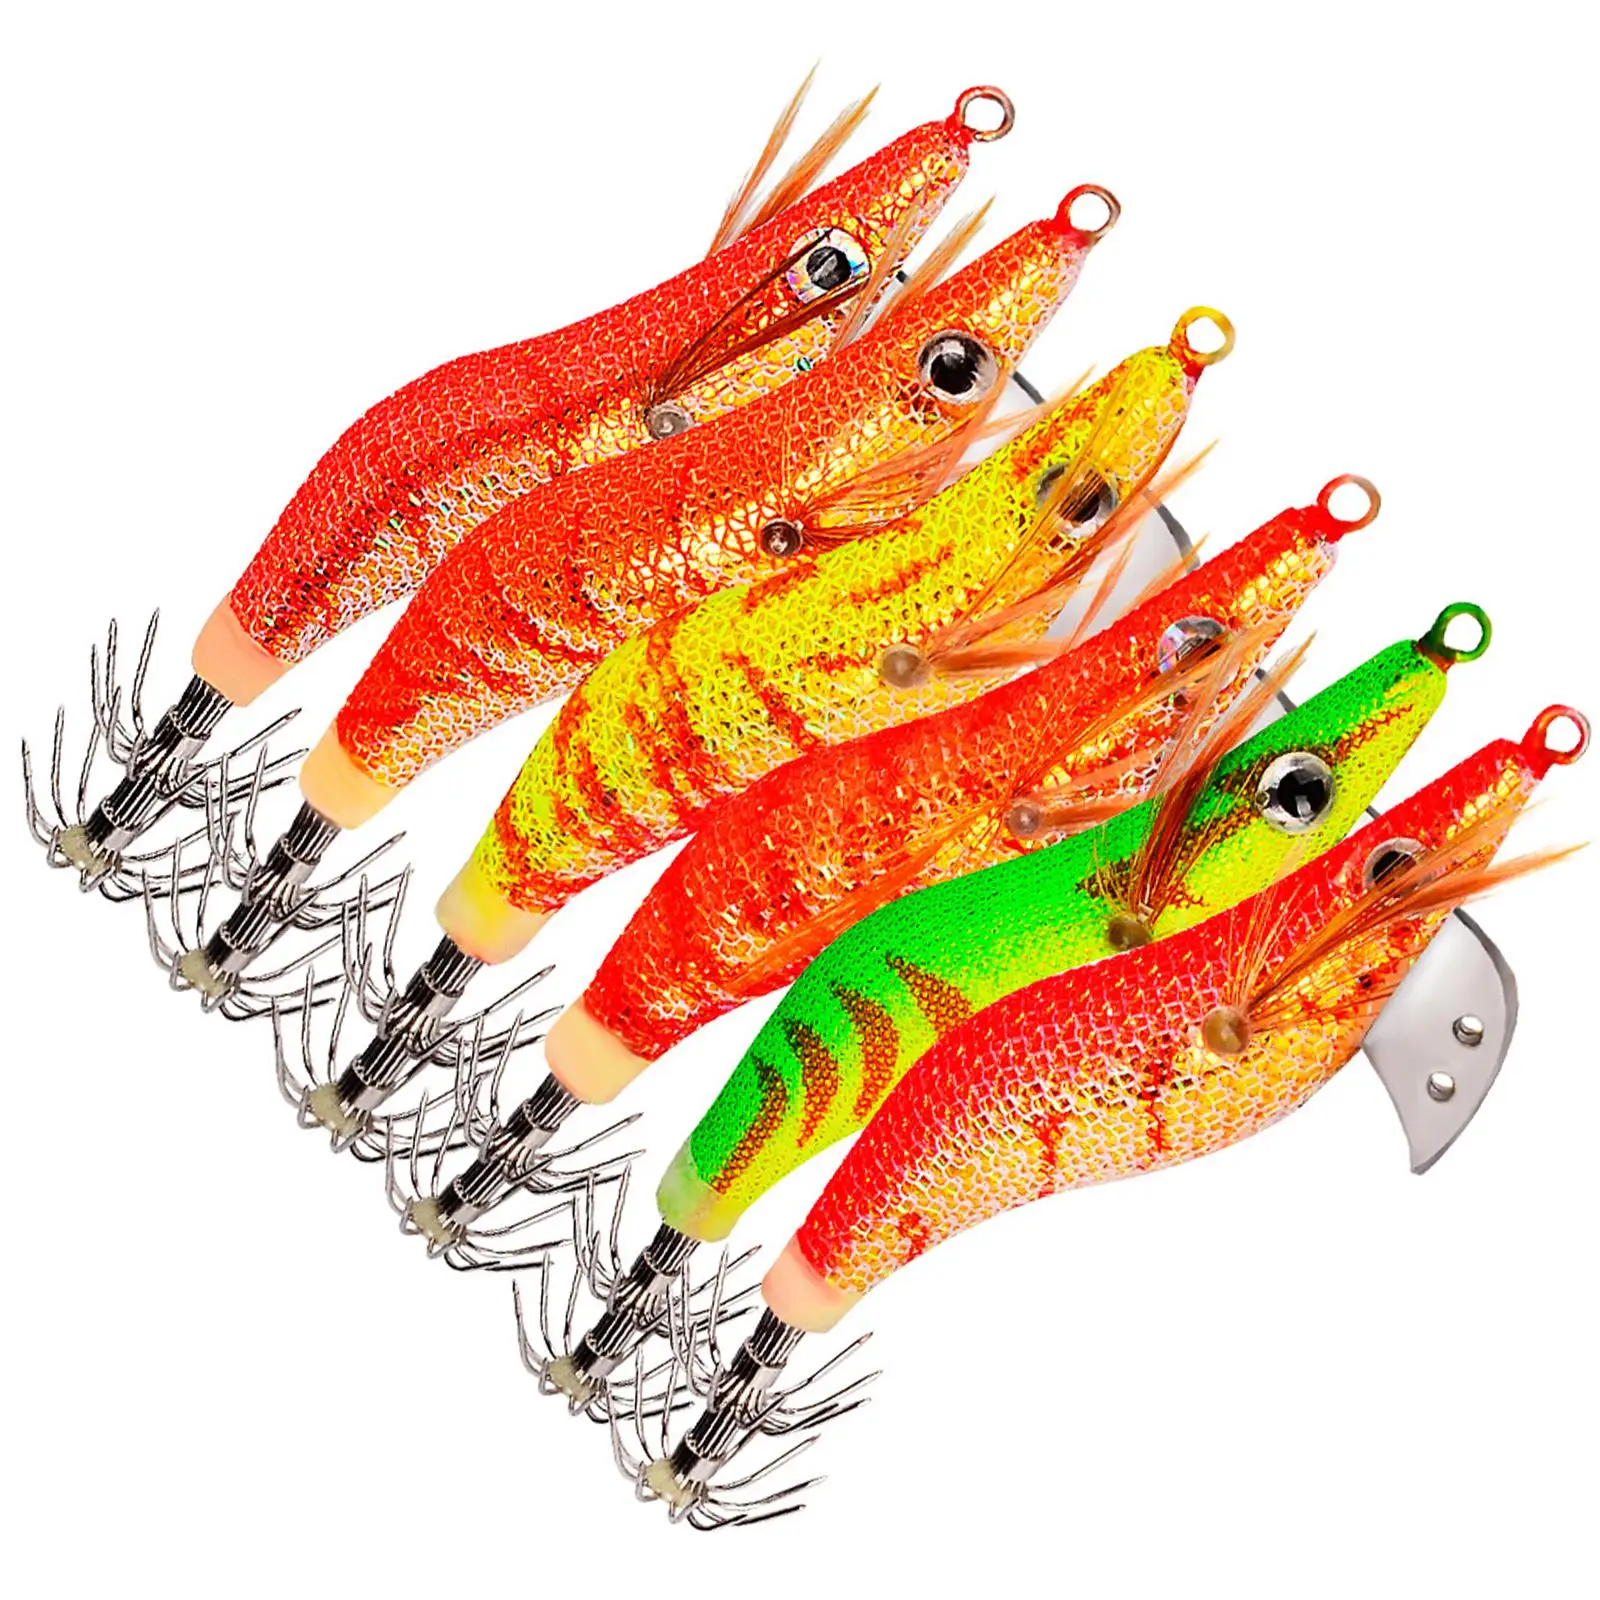 6Pcs Octopus Lures Night Fishing Tackle Artificial Fishing Lures Tackle Hook Cuttlefish Sleeve Jig Squid Jigs Kits for Saltwater